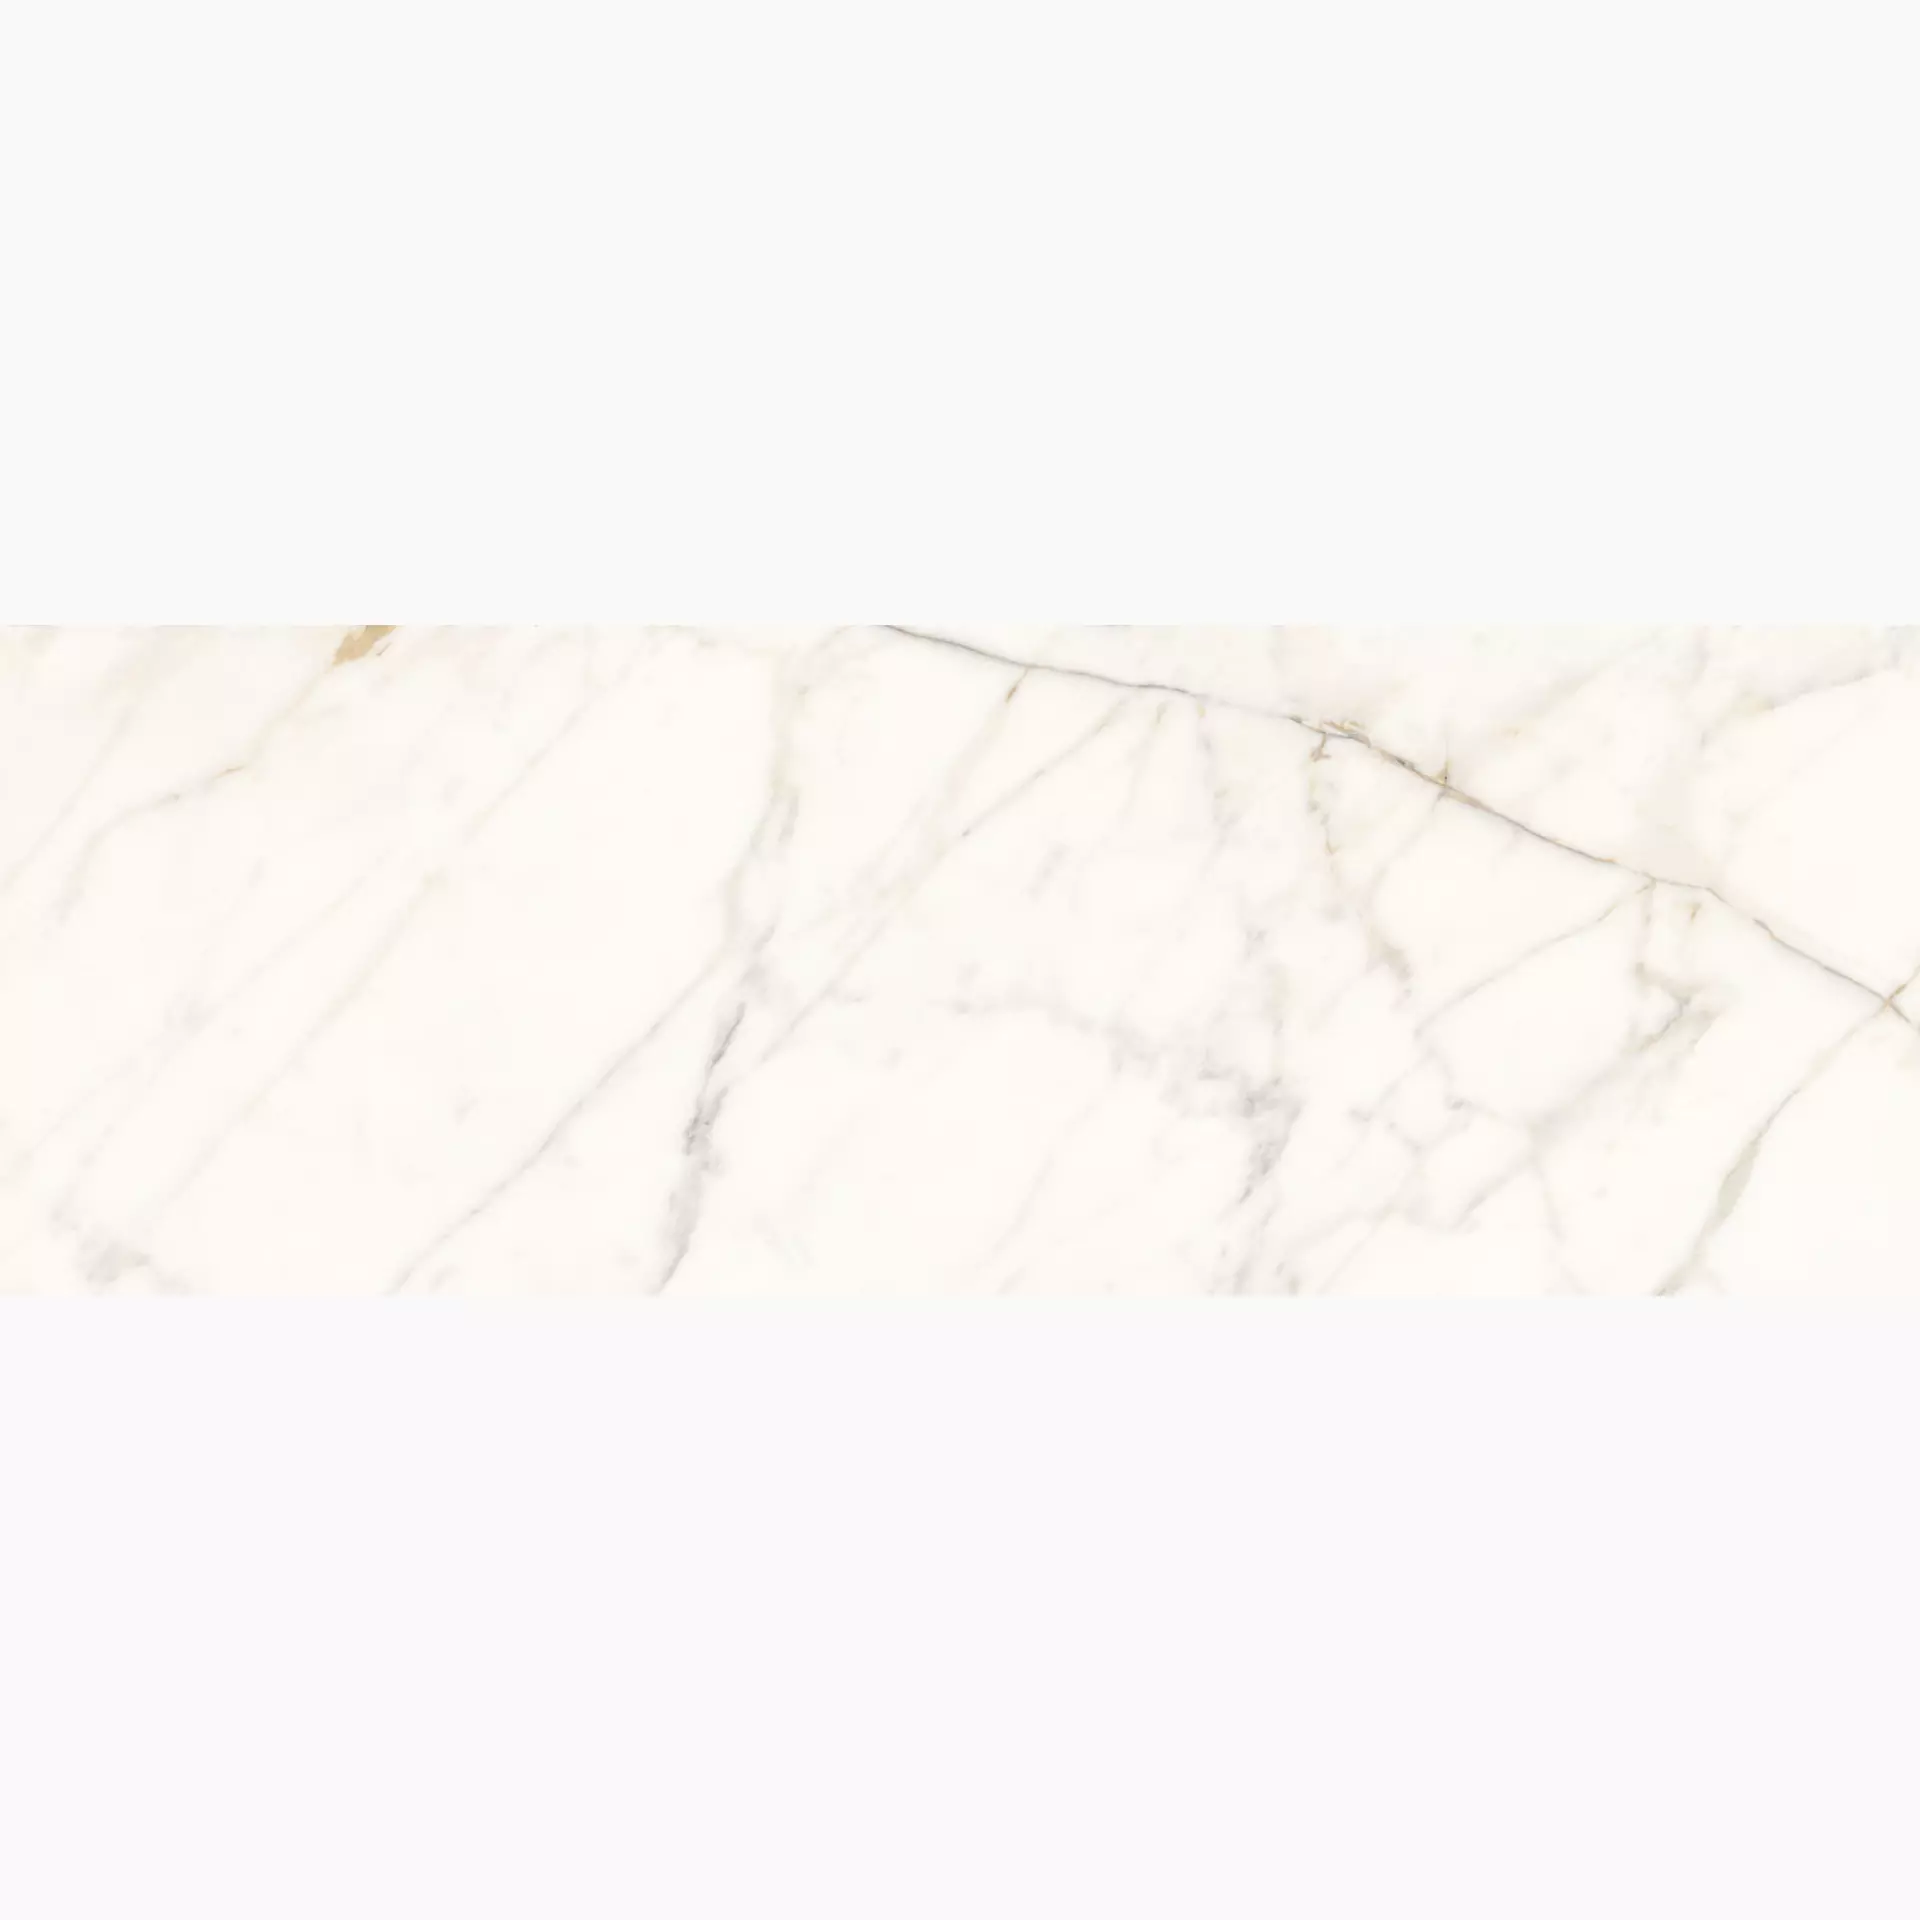 Marazzi Allmarble Wall Golden White Lux M6T1 40x120cm rectified 6mm